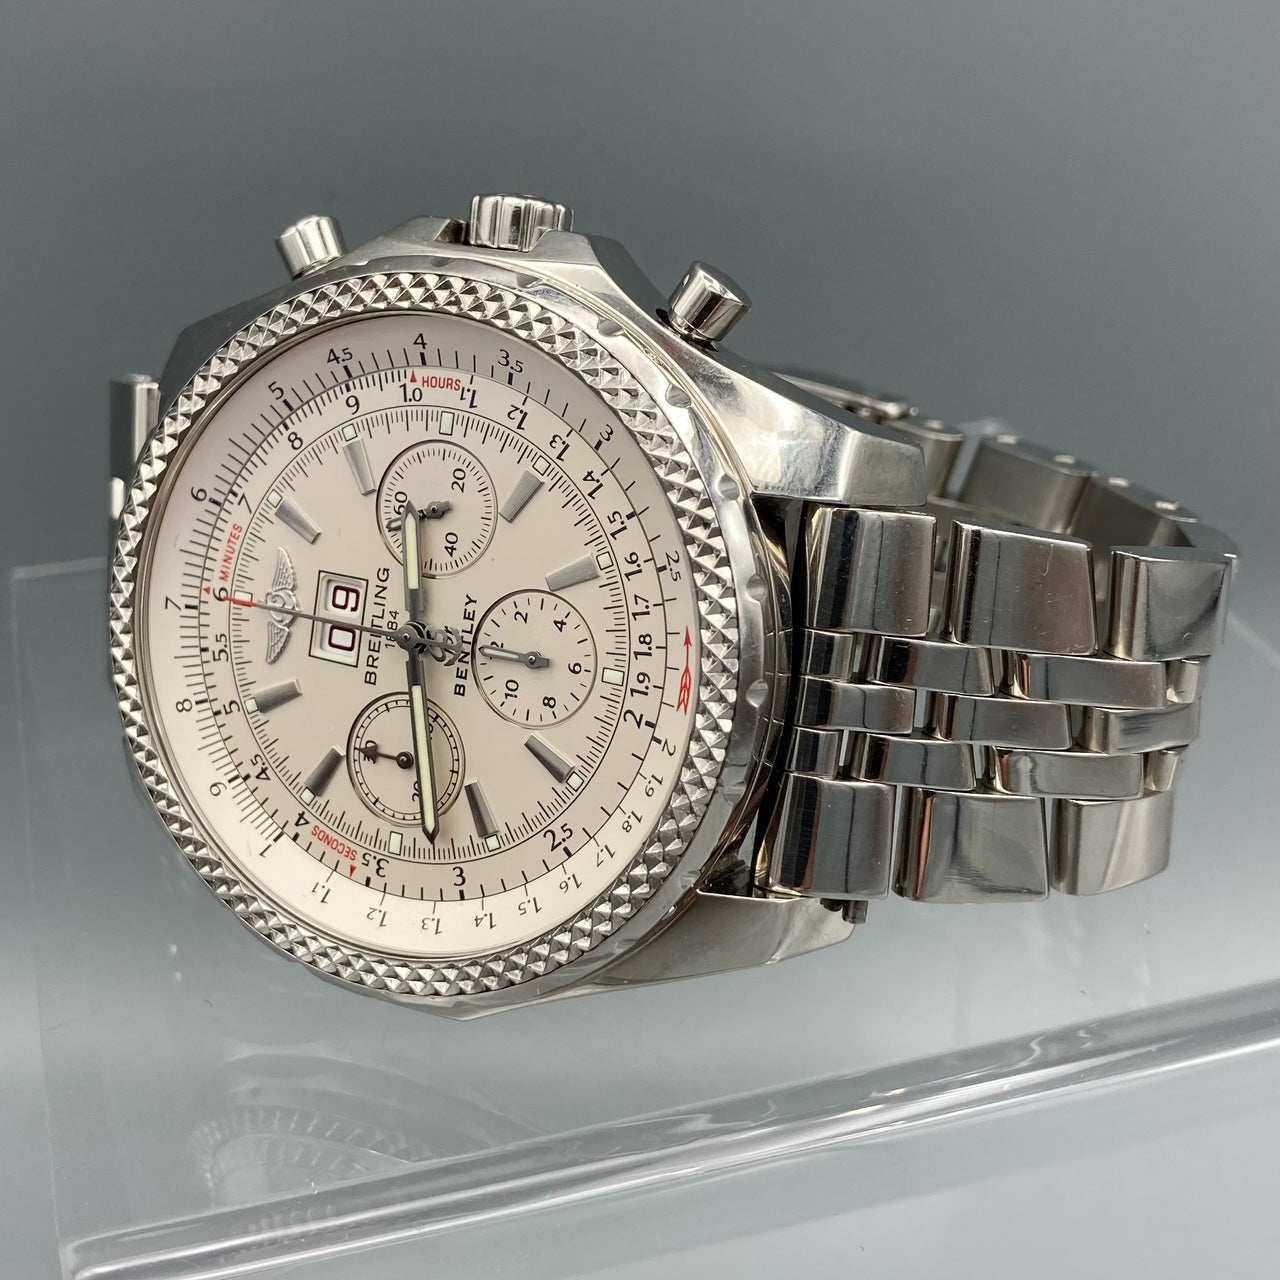 Breitling For Bentley Automatic Chronograph White Men's Watch - A44362